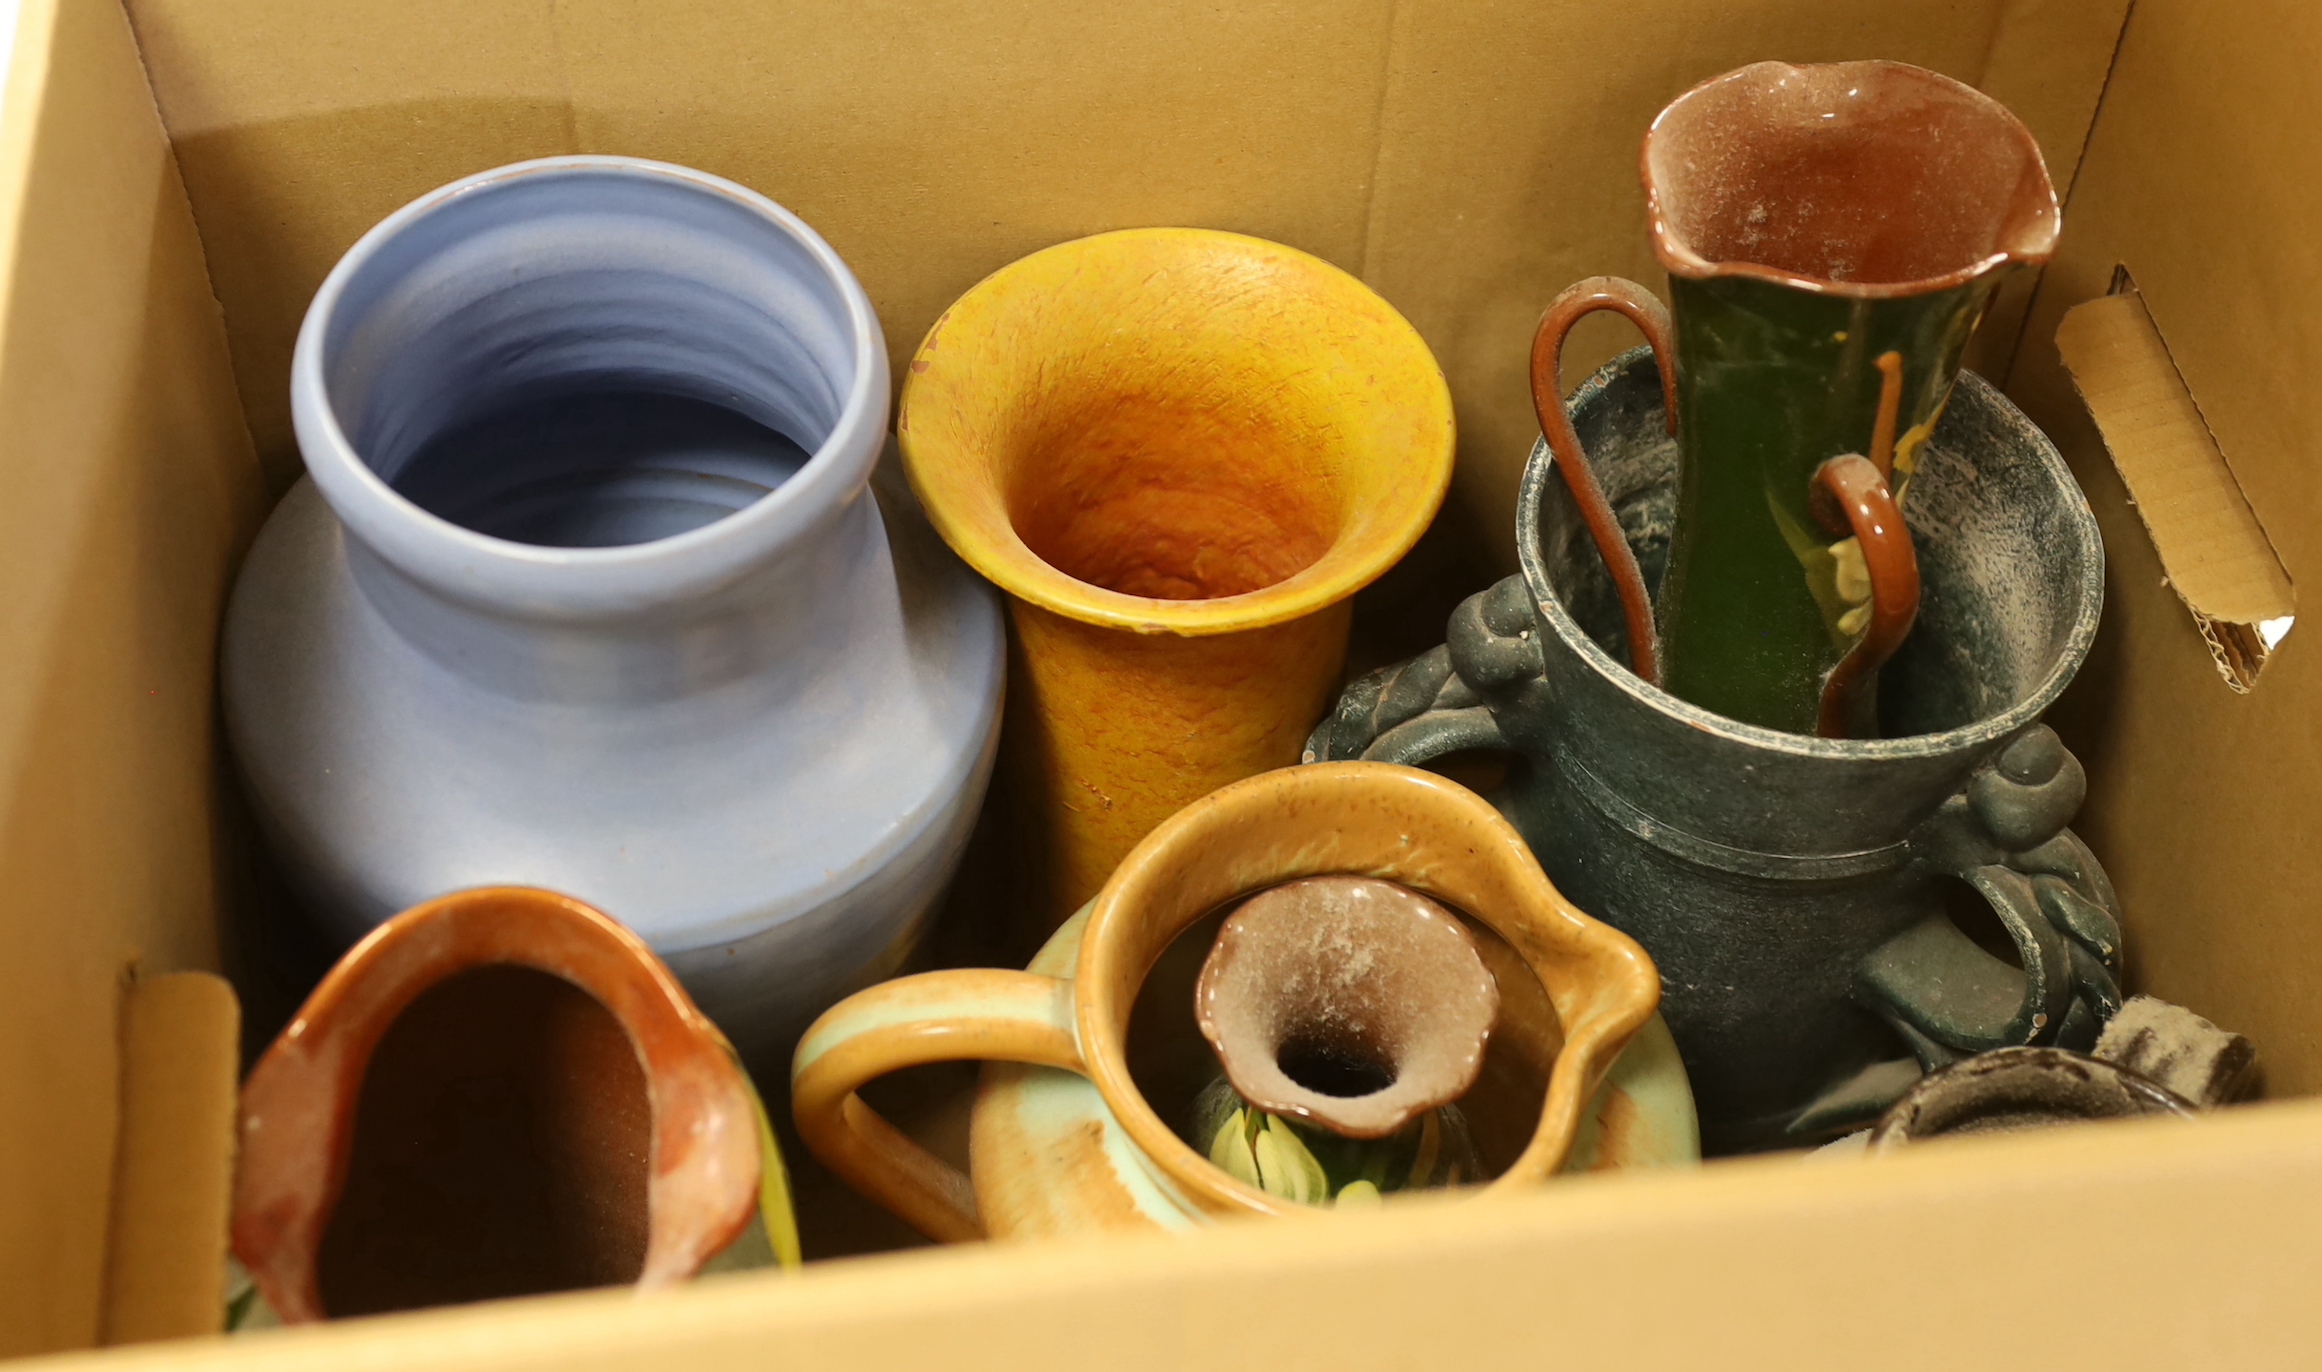 A large collection of assorted glazed Dickerware vases, jugs and pots